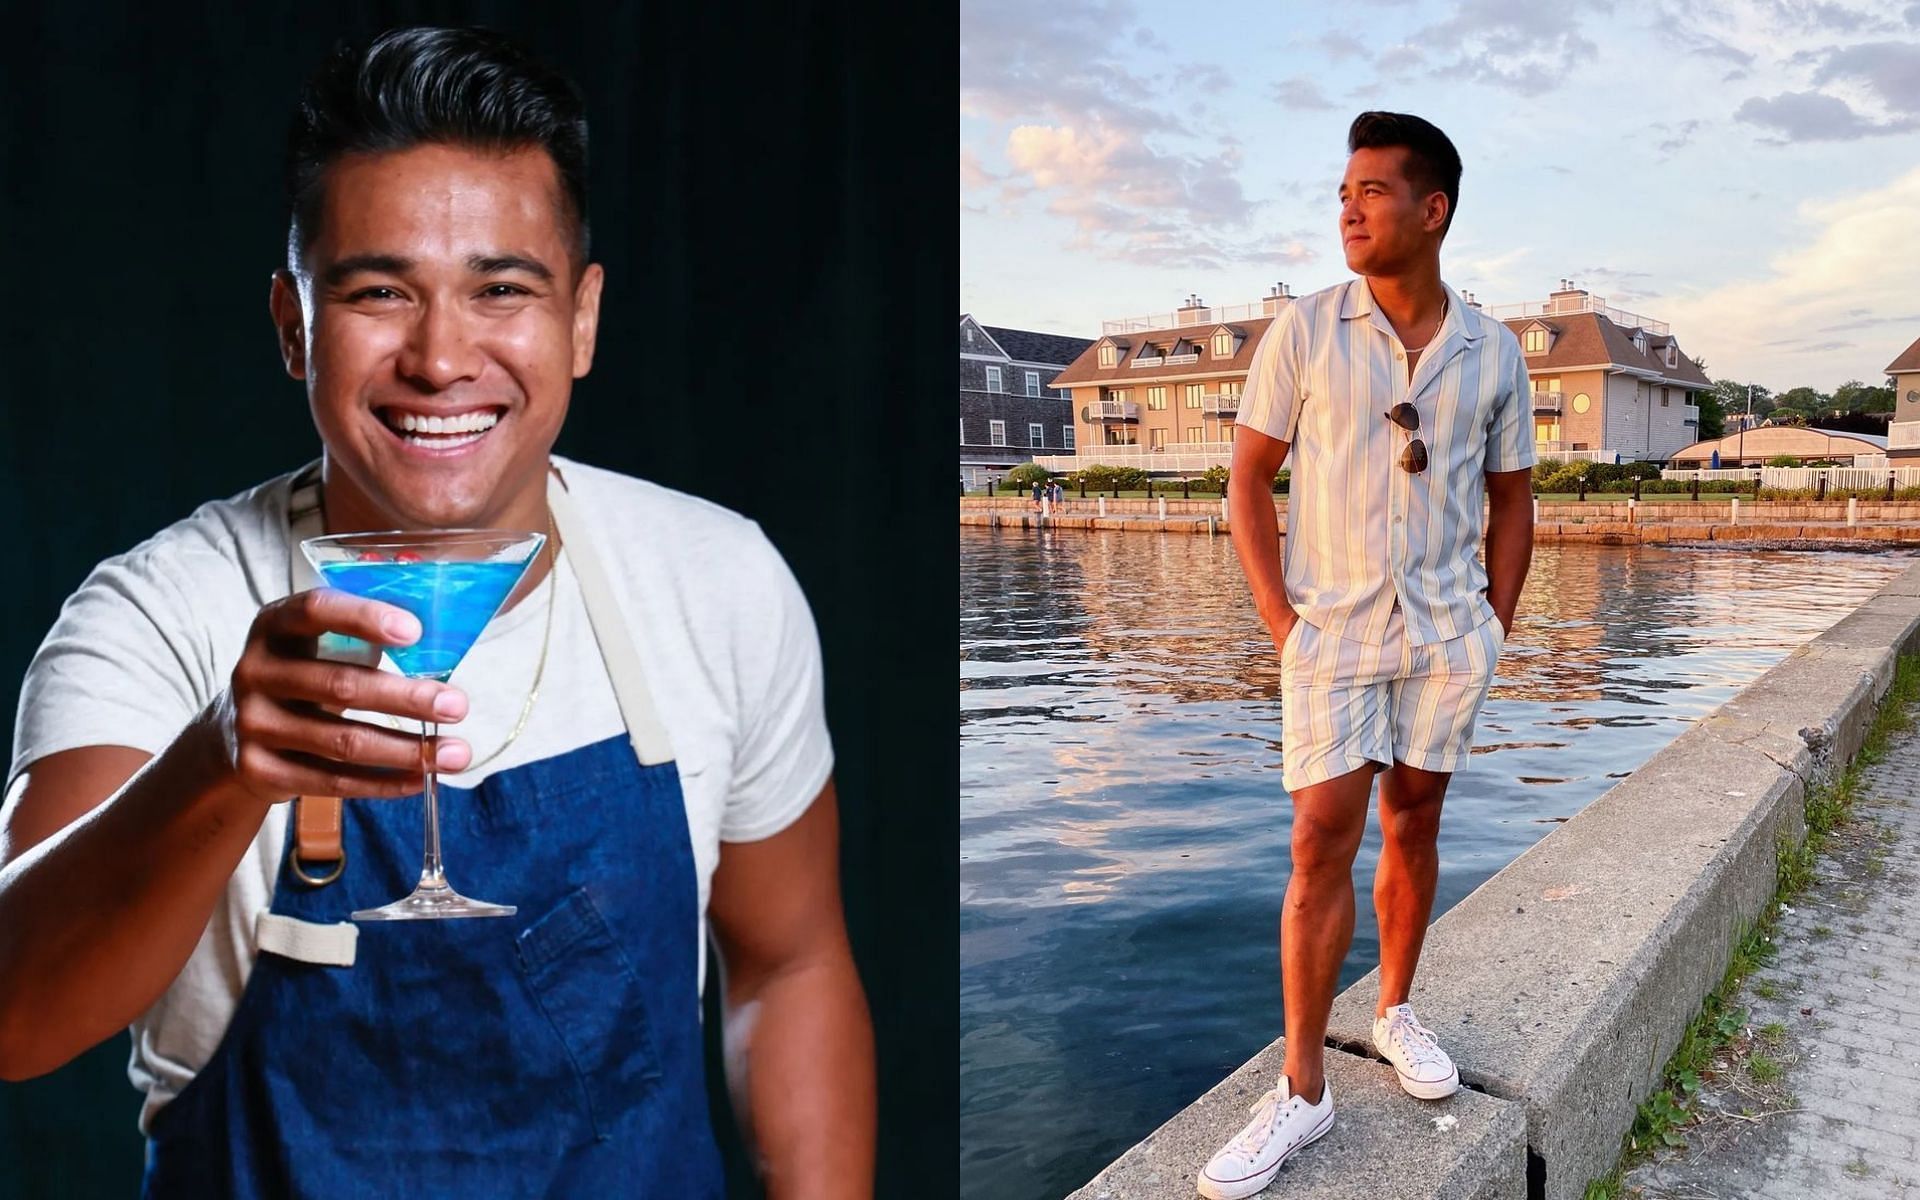 Jordan Andino has hosted and judges many Food Network shows before hosting Cook at all Costs (Images via fork_knife/ Instagram)